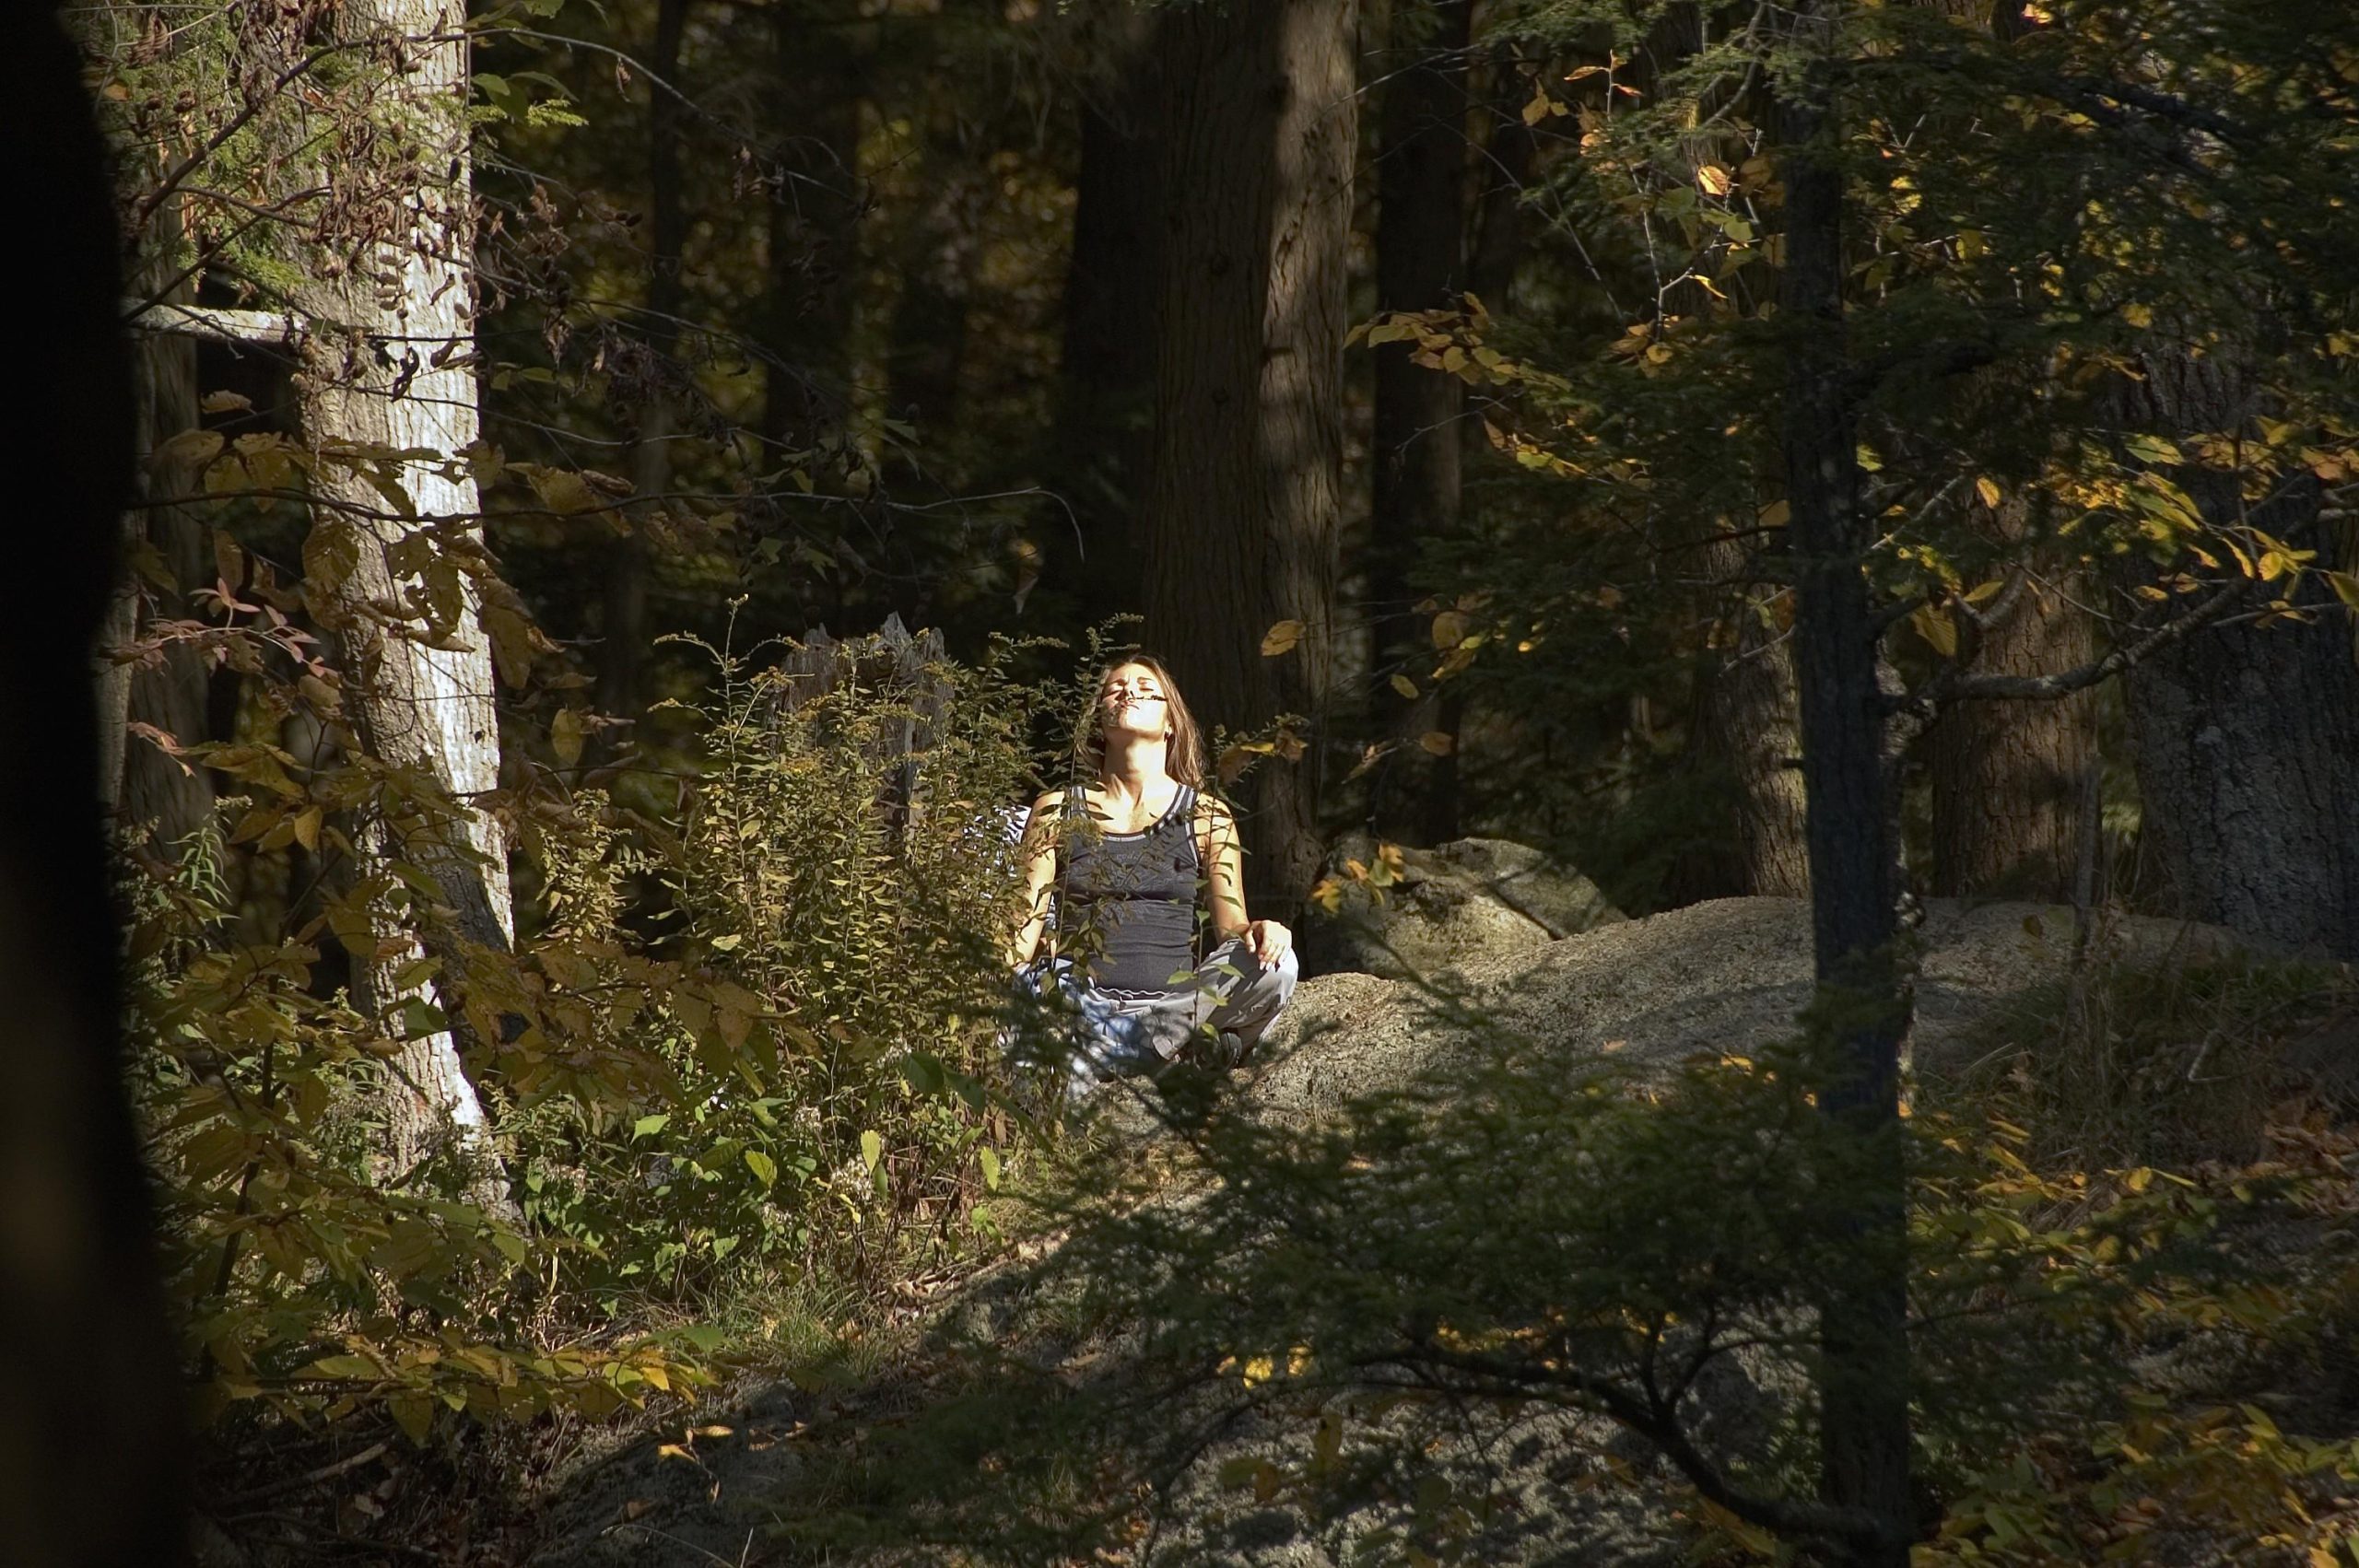 Meditation at Kent falls (user submitted)